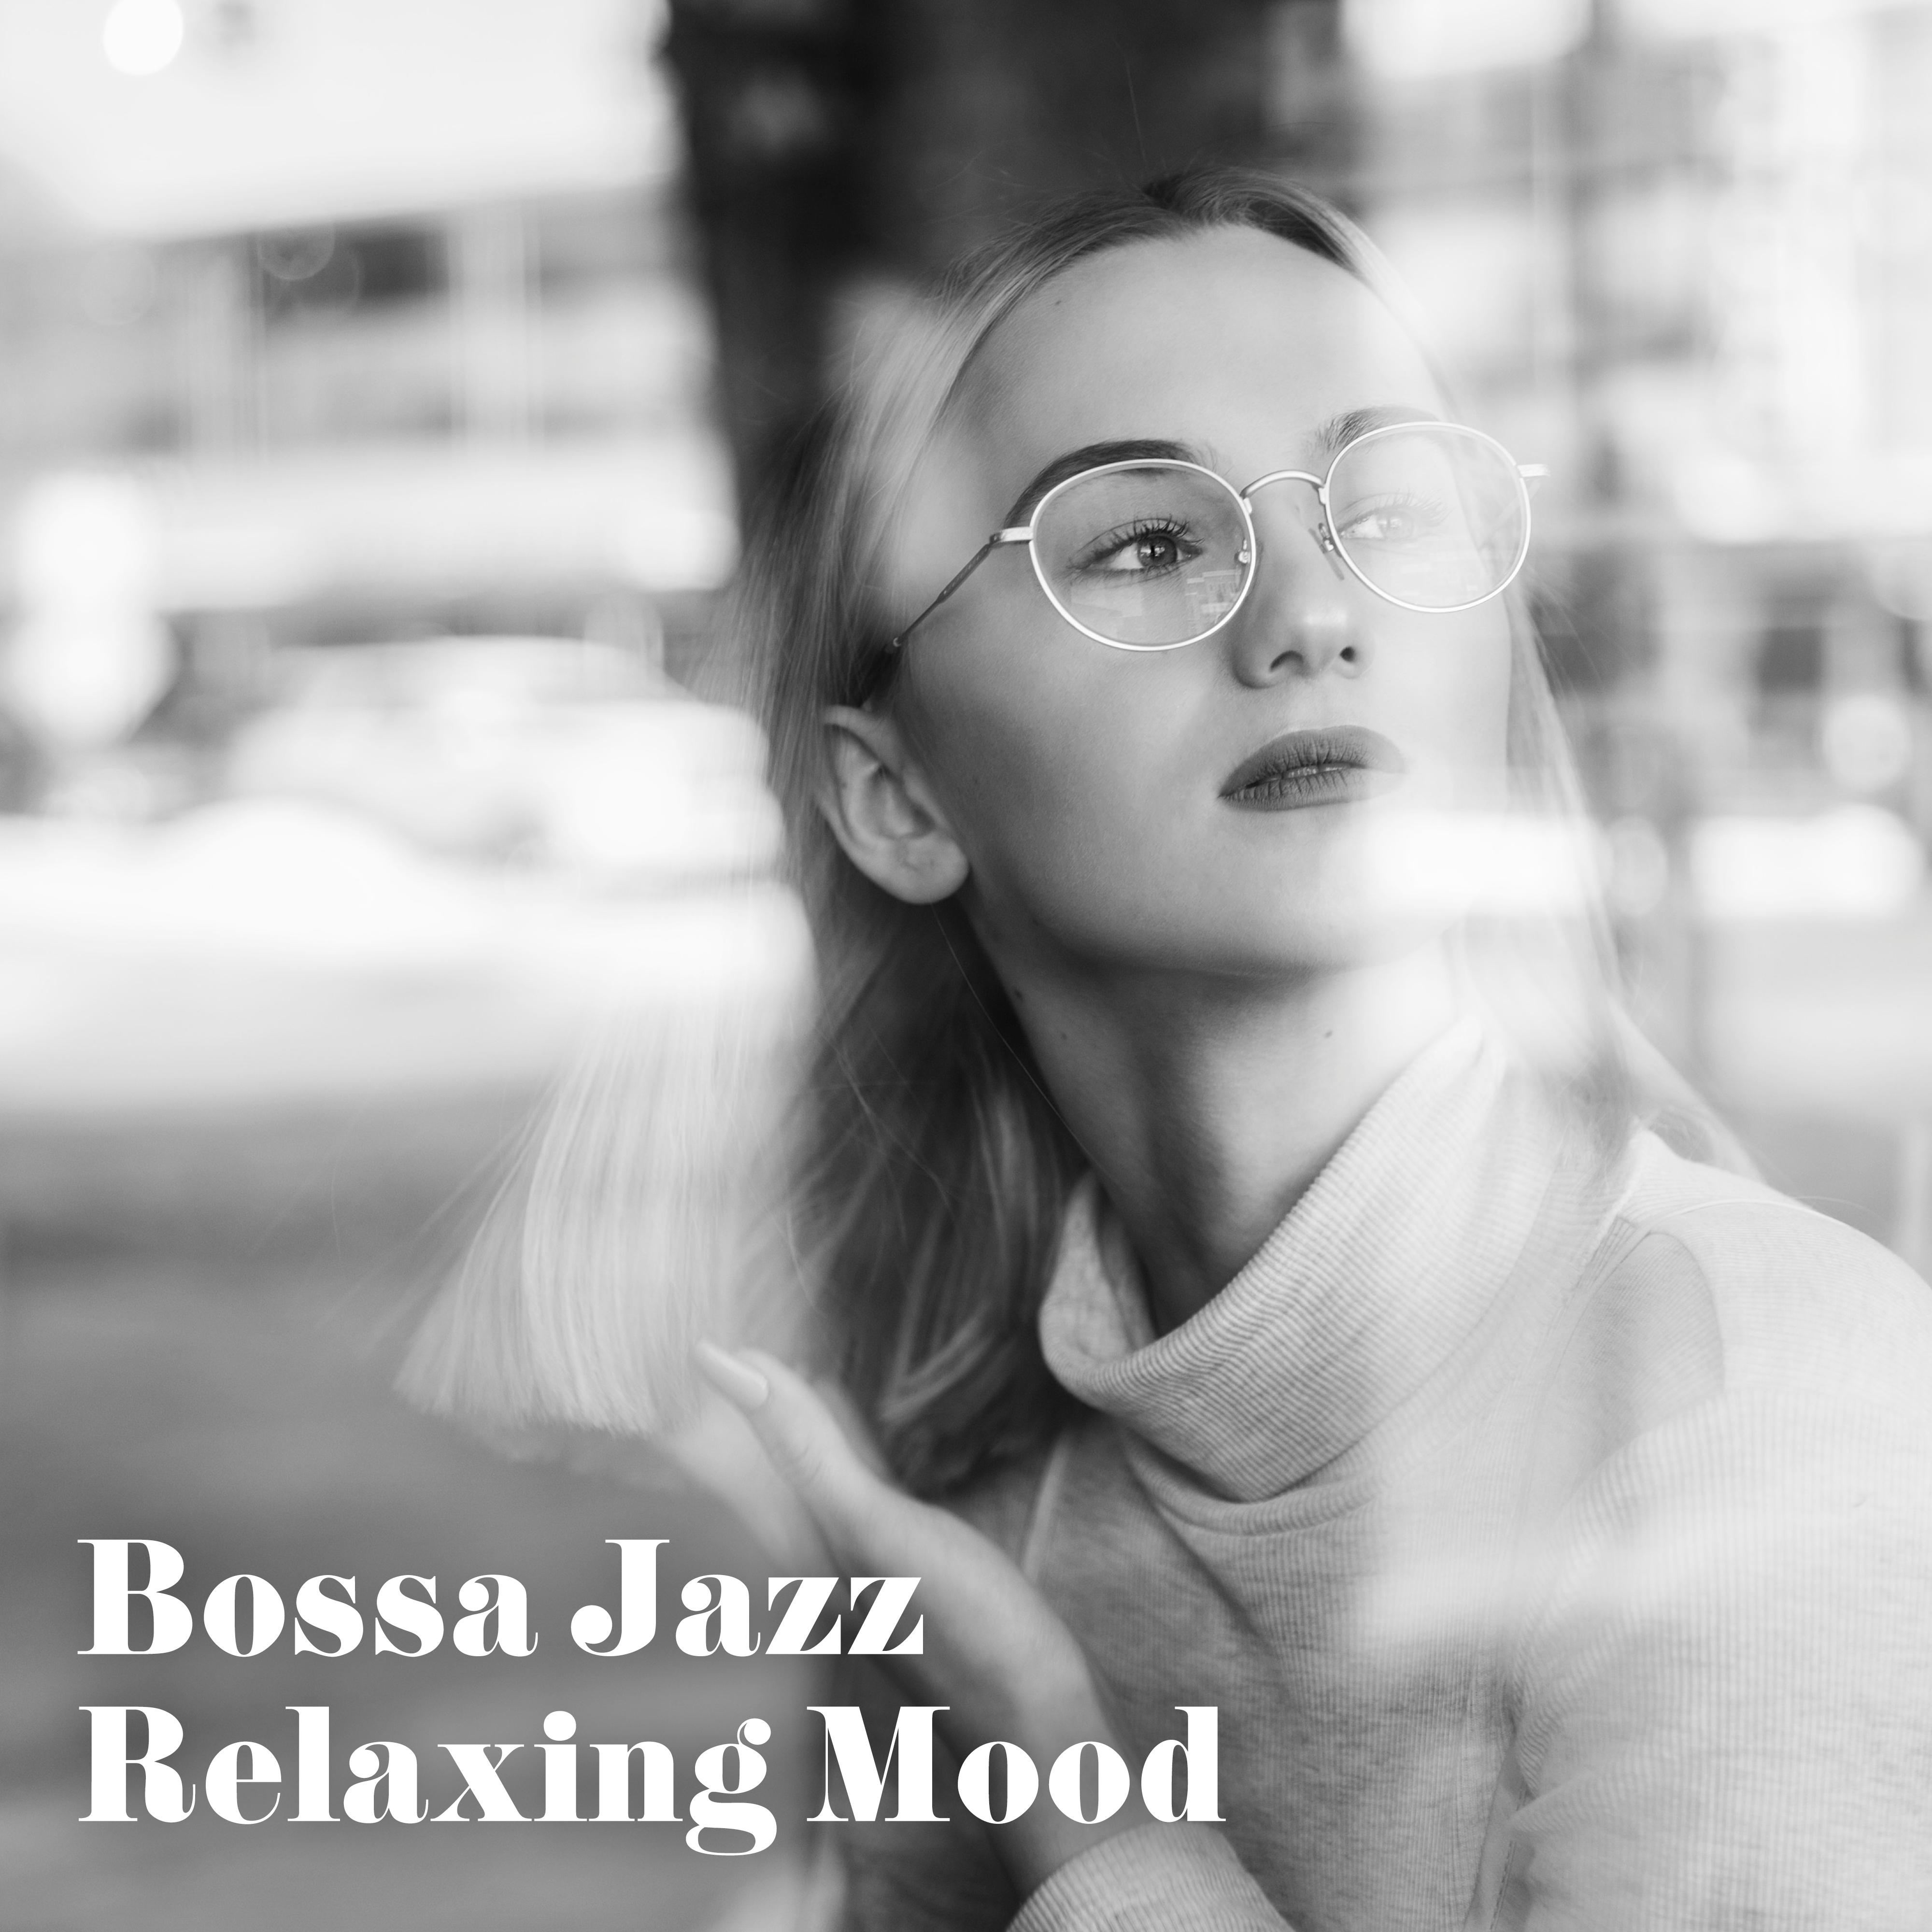 Bossa Jazz Relaxing Mood: 2019 Smooth Jazz Songs for Perfect Relaxation, Calming Down, Stress Relief Music